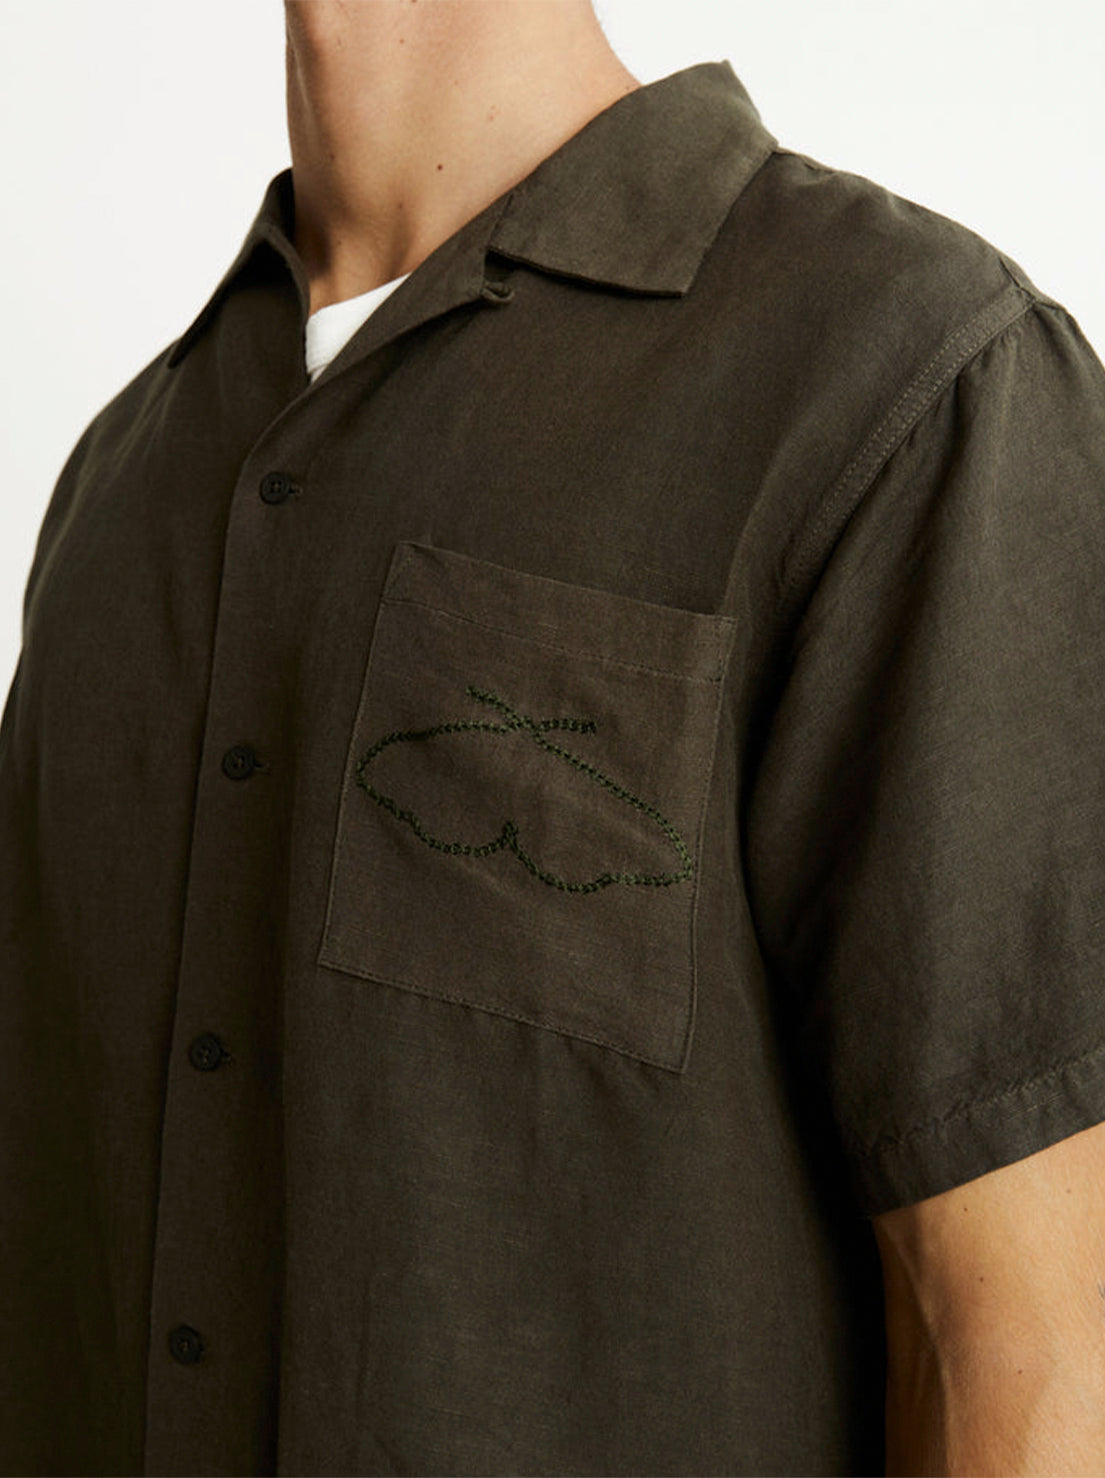 Mr Simple - Huck Embroidered SS Shirt - Fatigue